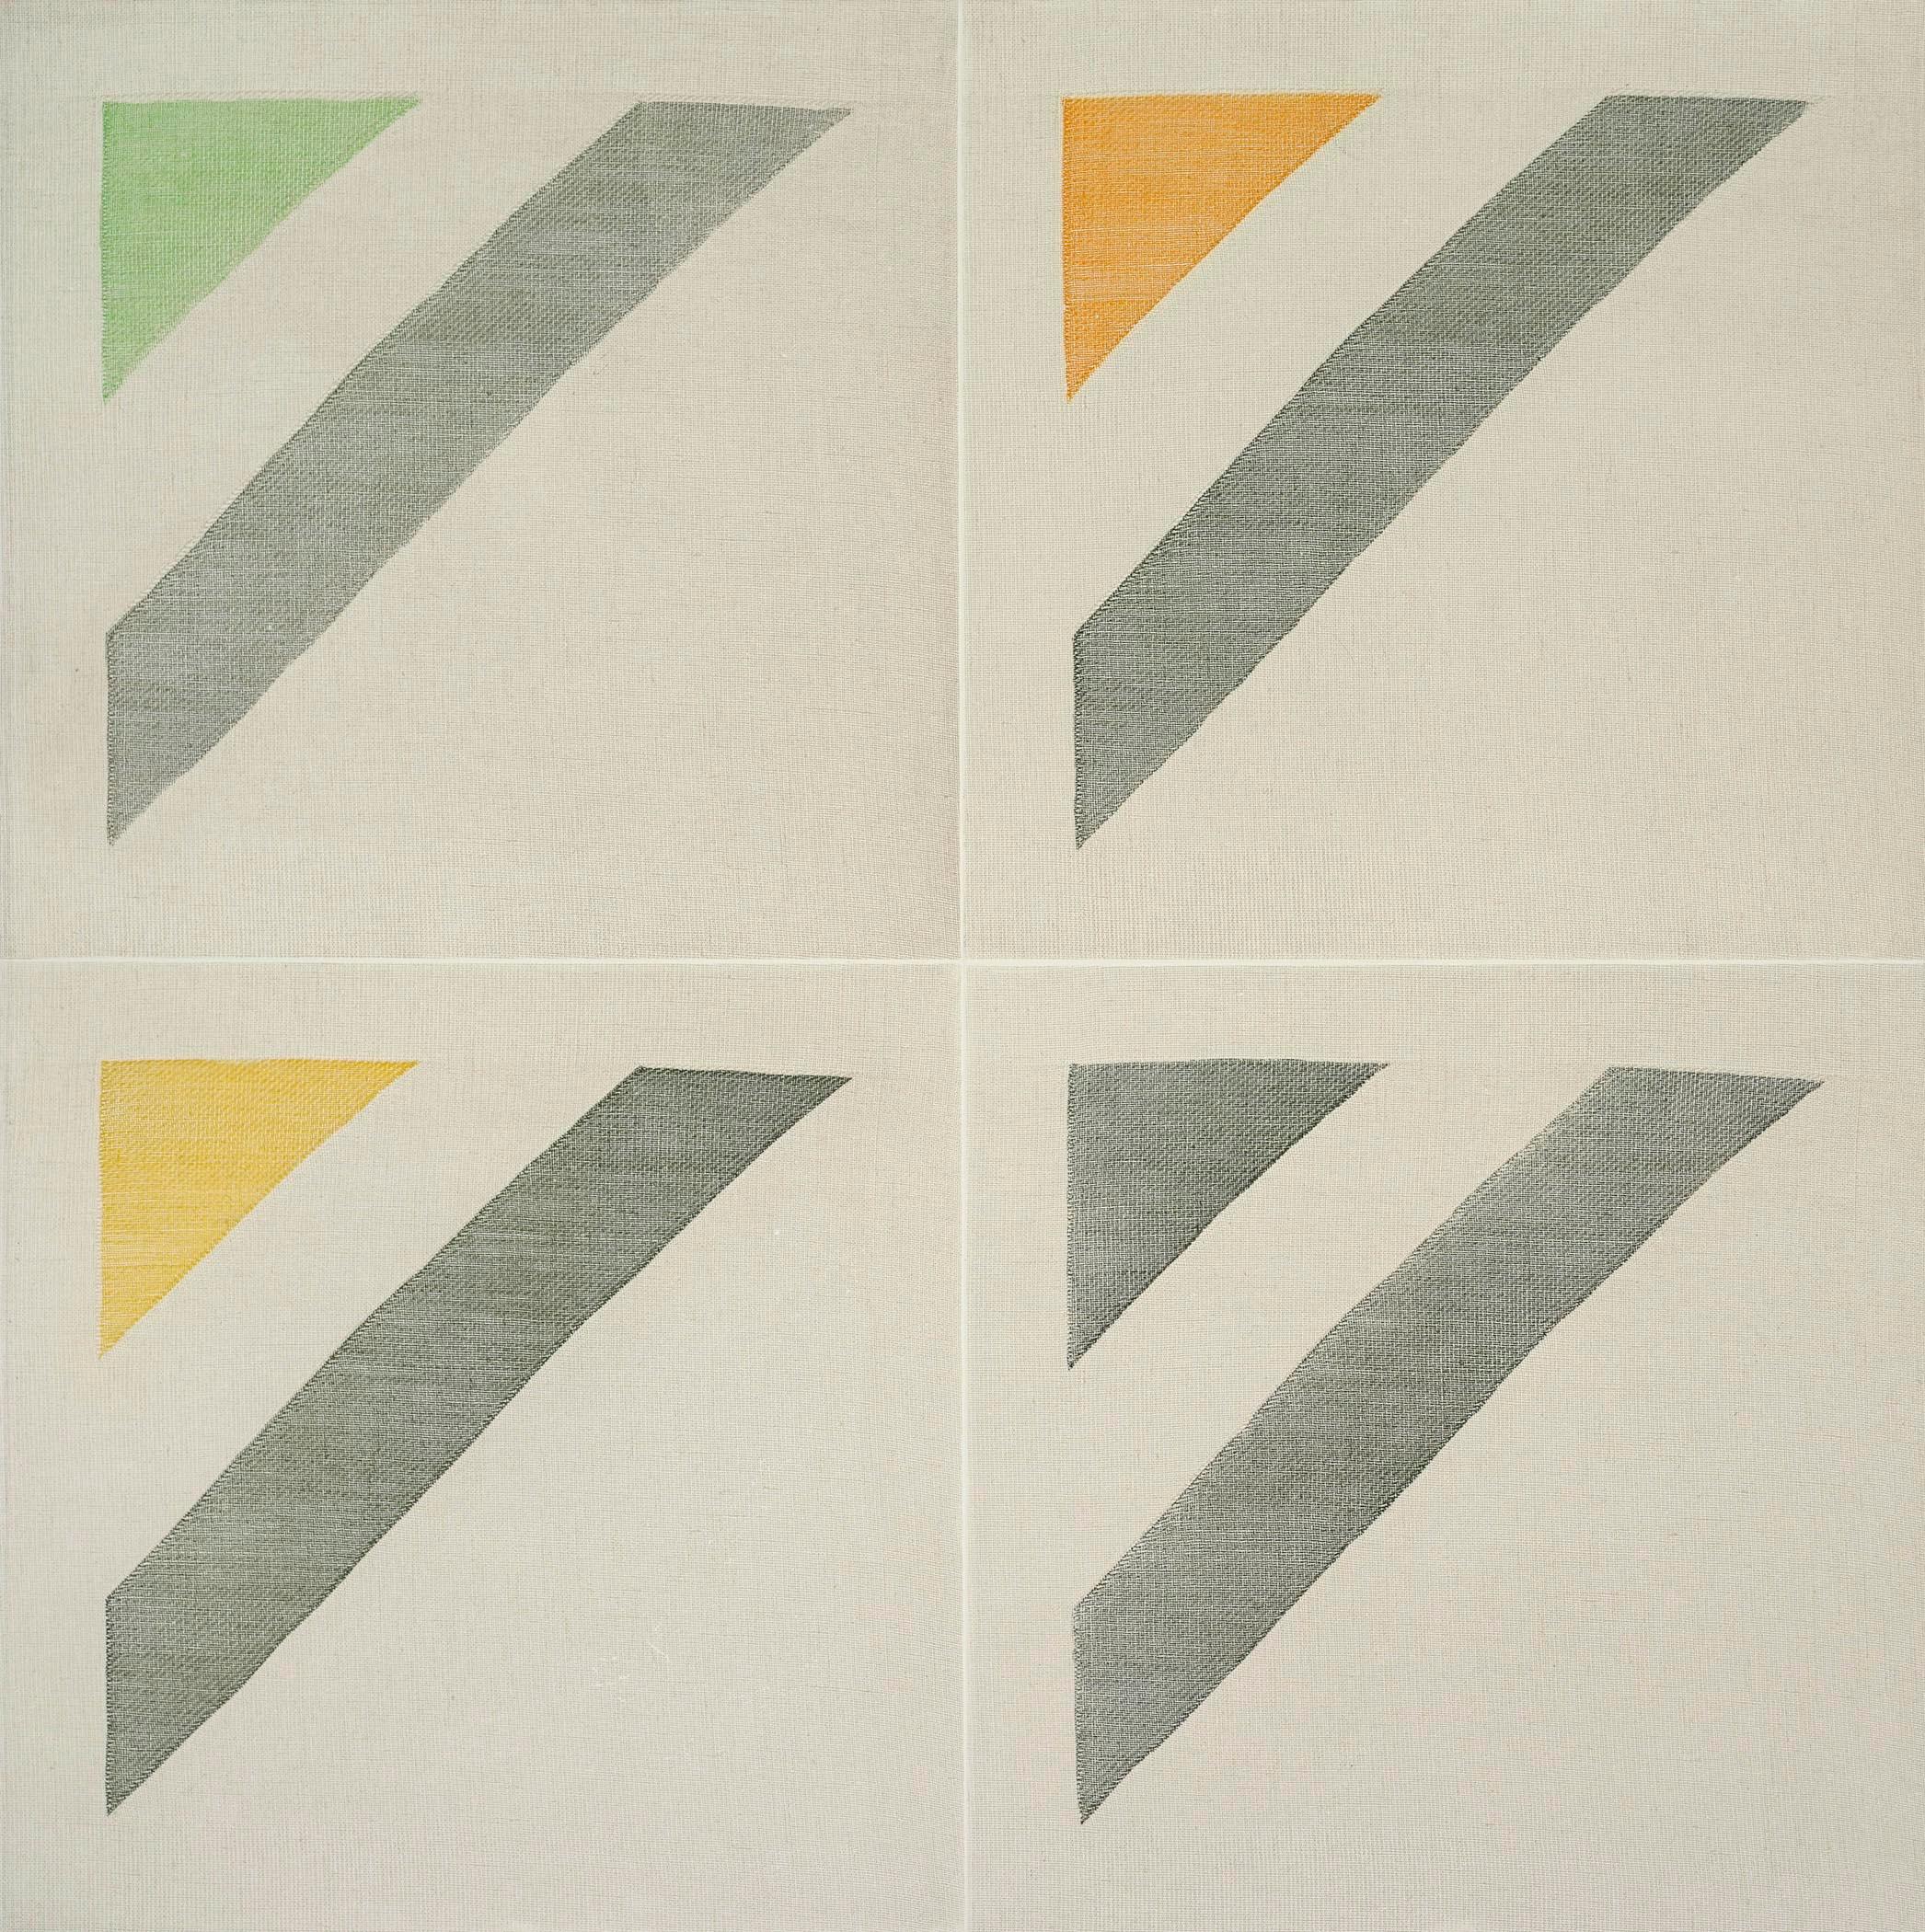 Twill Weave Grid (Oxide Green, Spring Green, Indian Yellow, Permanent Yellow)  - Print by Ruth Laskey